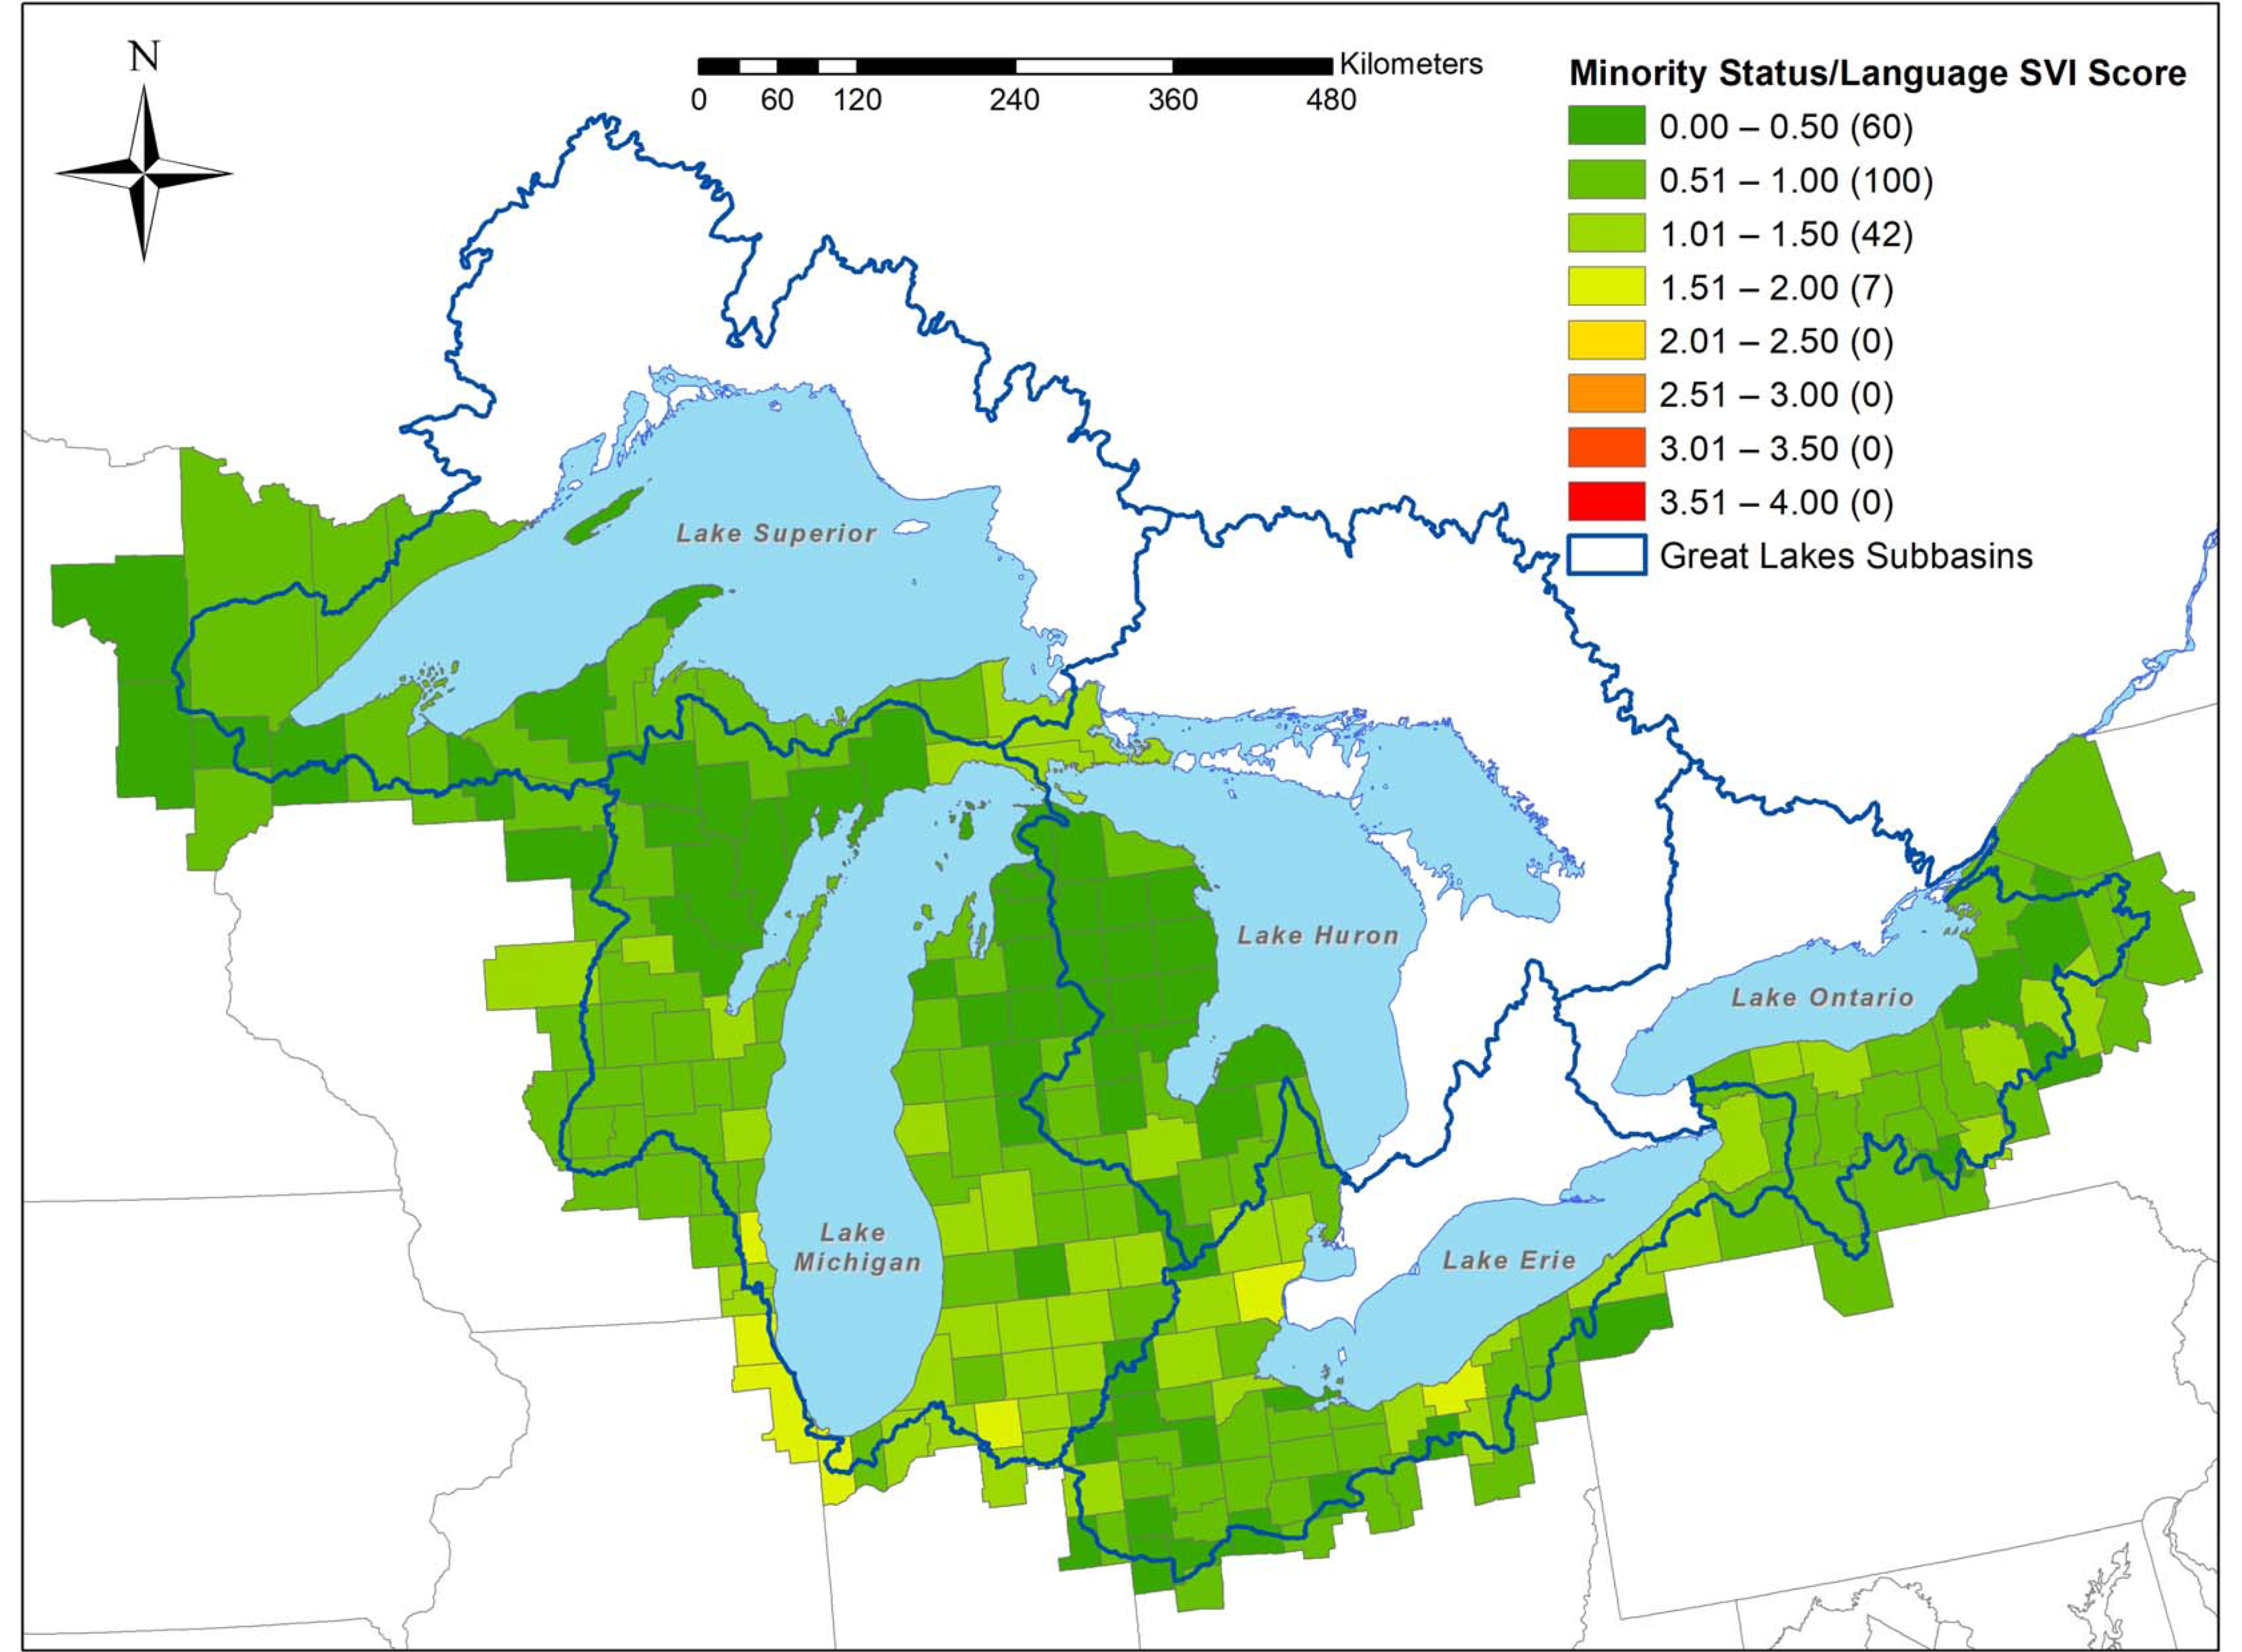 Map of Lake Erie showing the central basin boundaries, included outflow